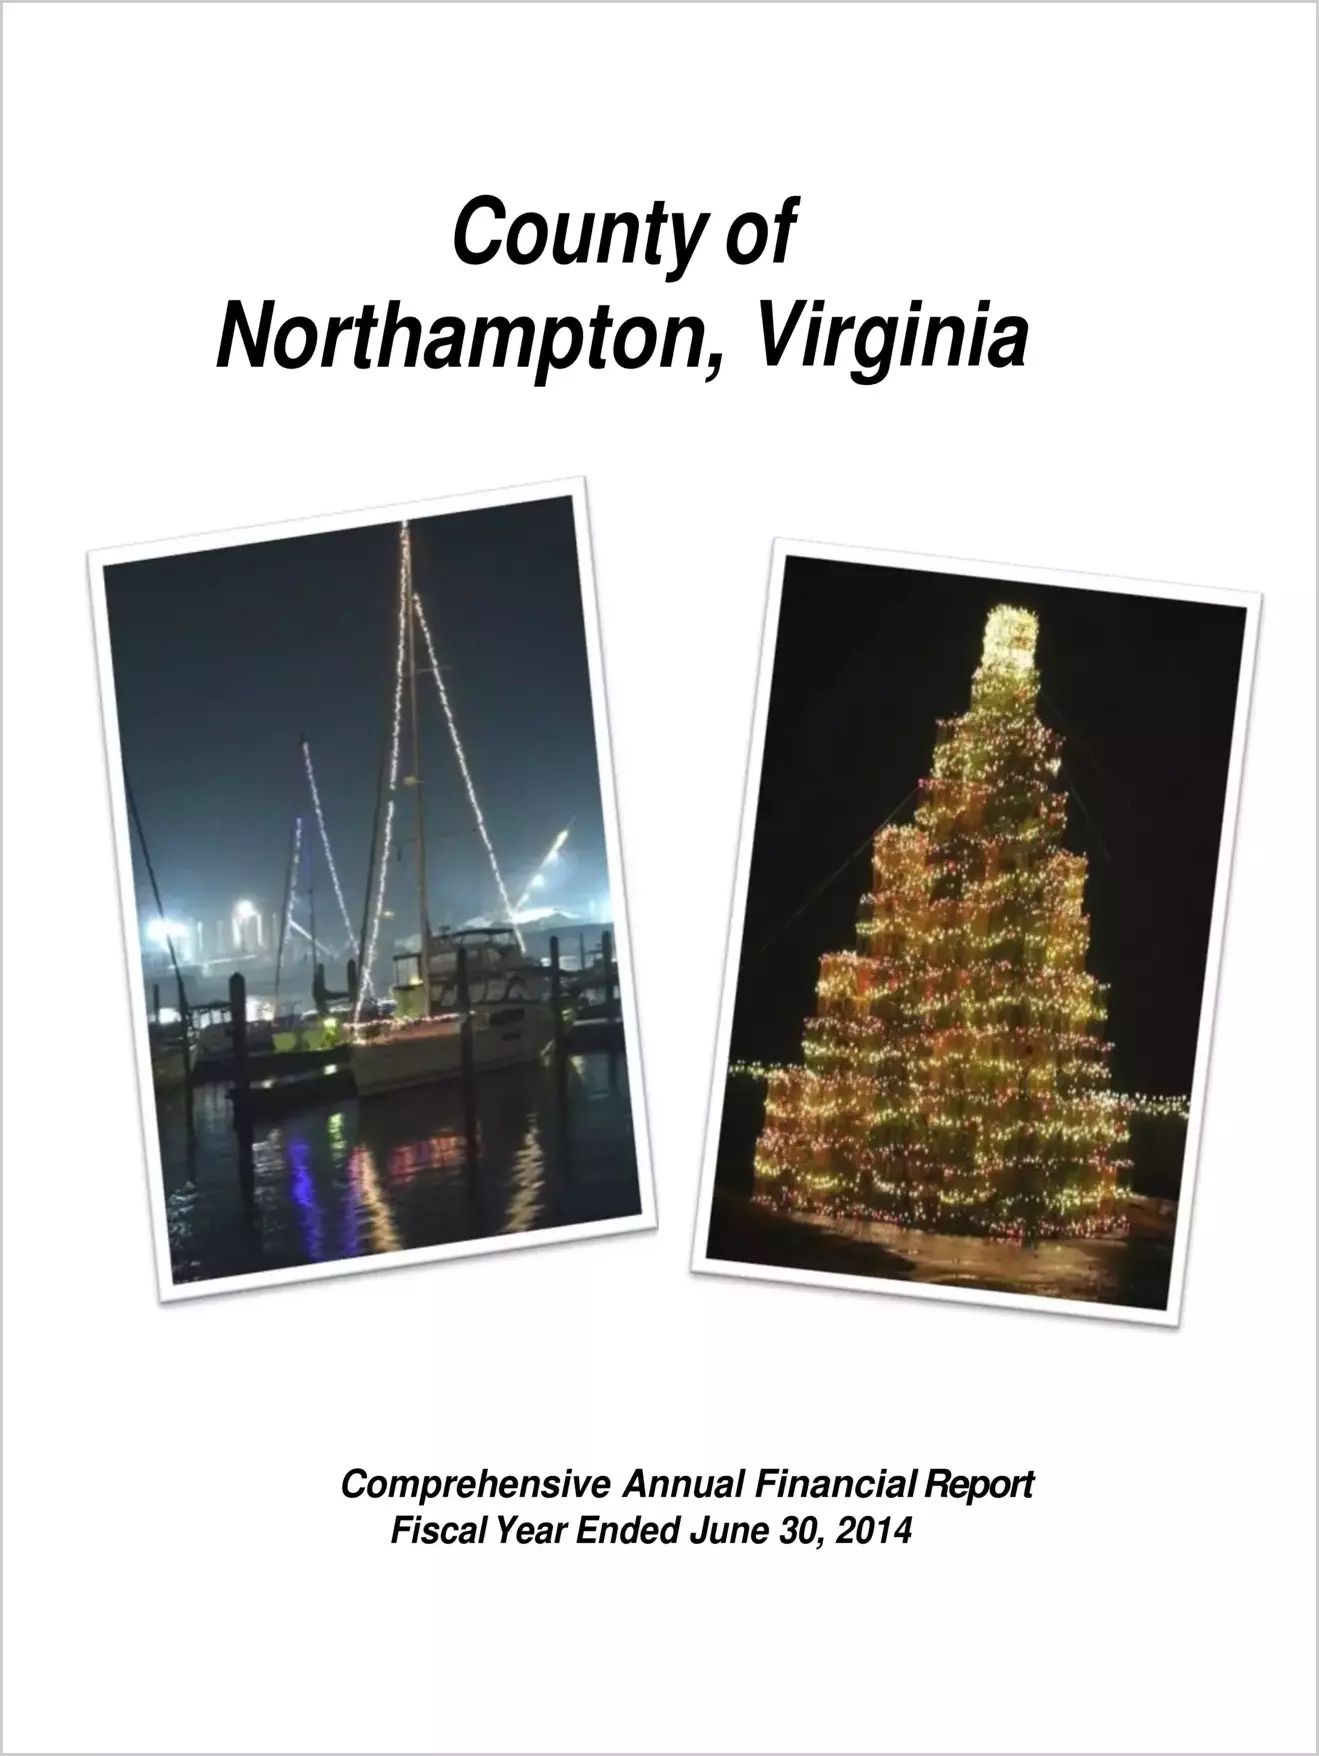 2014 Annual Financial Report for County of Northampton